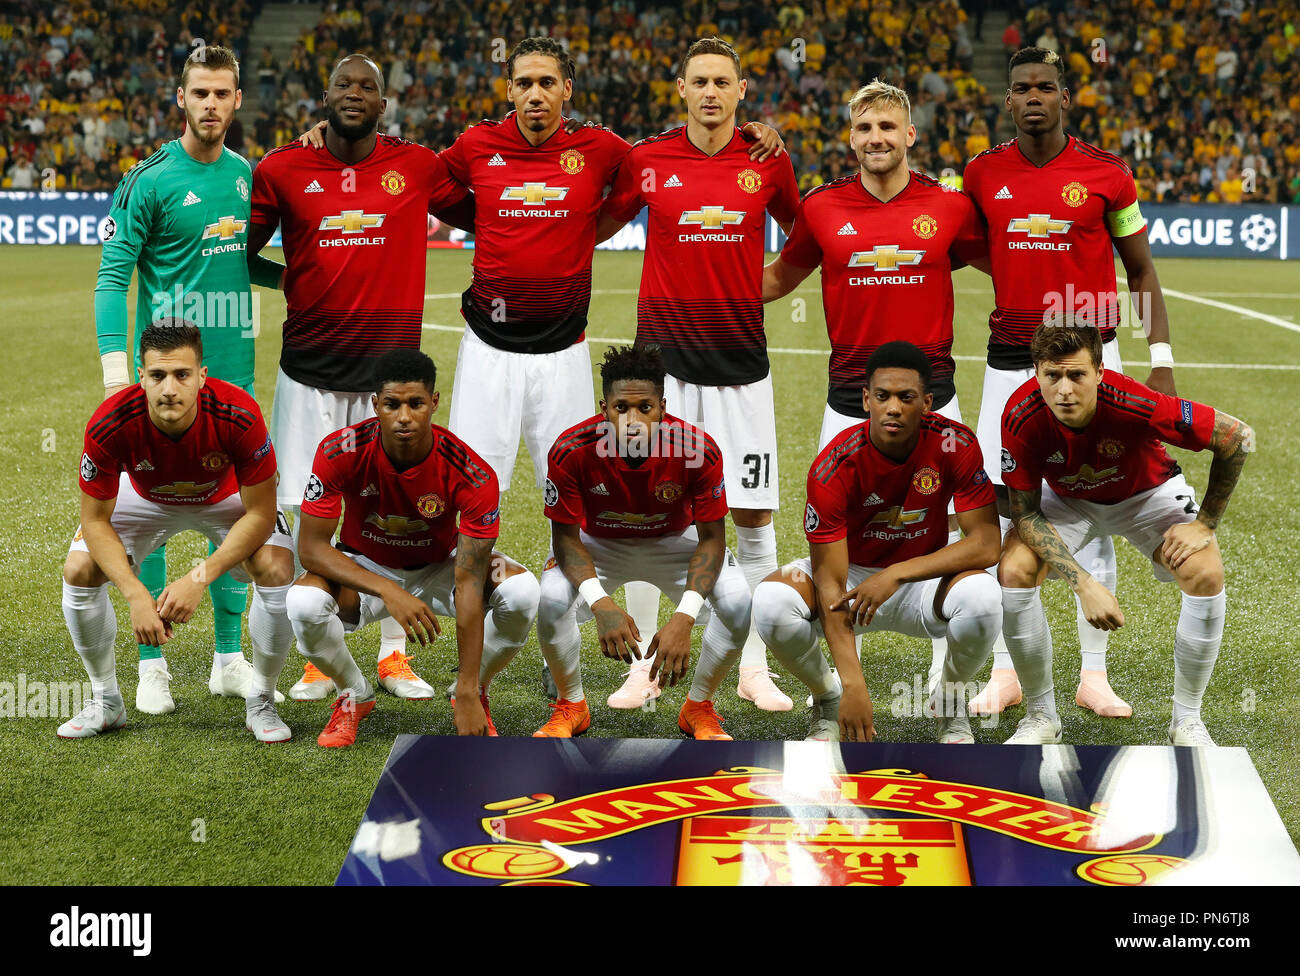 Bern, Switzerland. 19th Sep, 2018. Manchester United's players pose for group photos before the UEFA Champions League Group H match between BSC Young Boys and Manchester United at the Stade de Suisse Stadium in Bern, Switzerland, Sept. 19, 2018. Manchester United won 3-0. Credit: Ruben Sprich/Xinhua/Alamy Live News Stock Photo